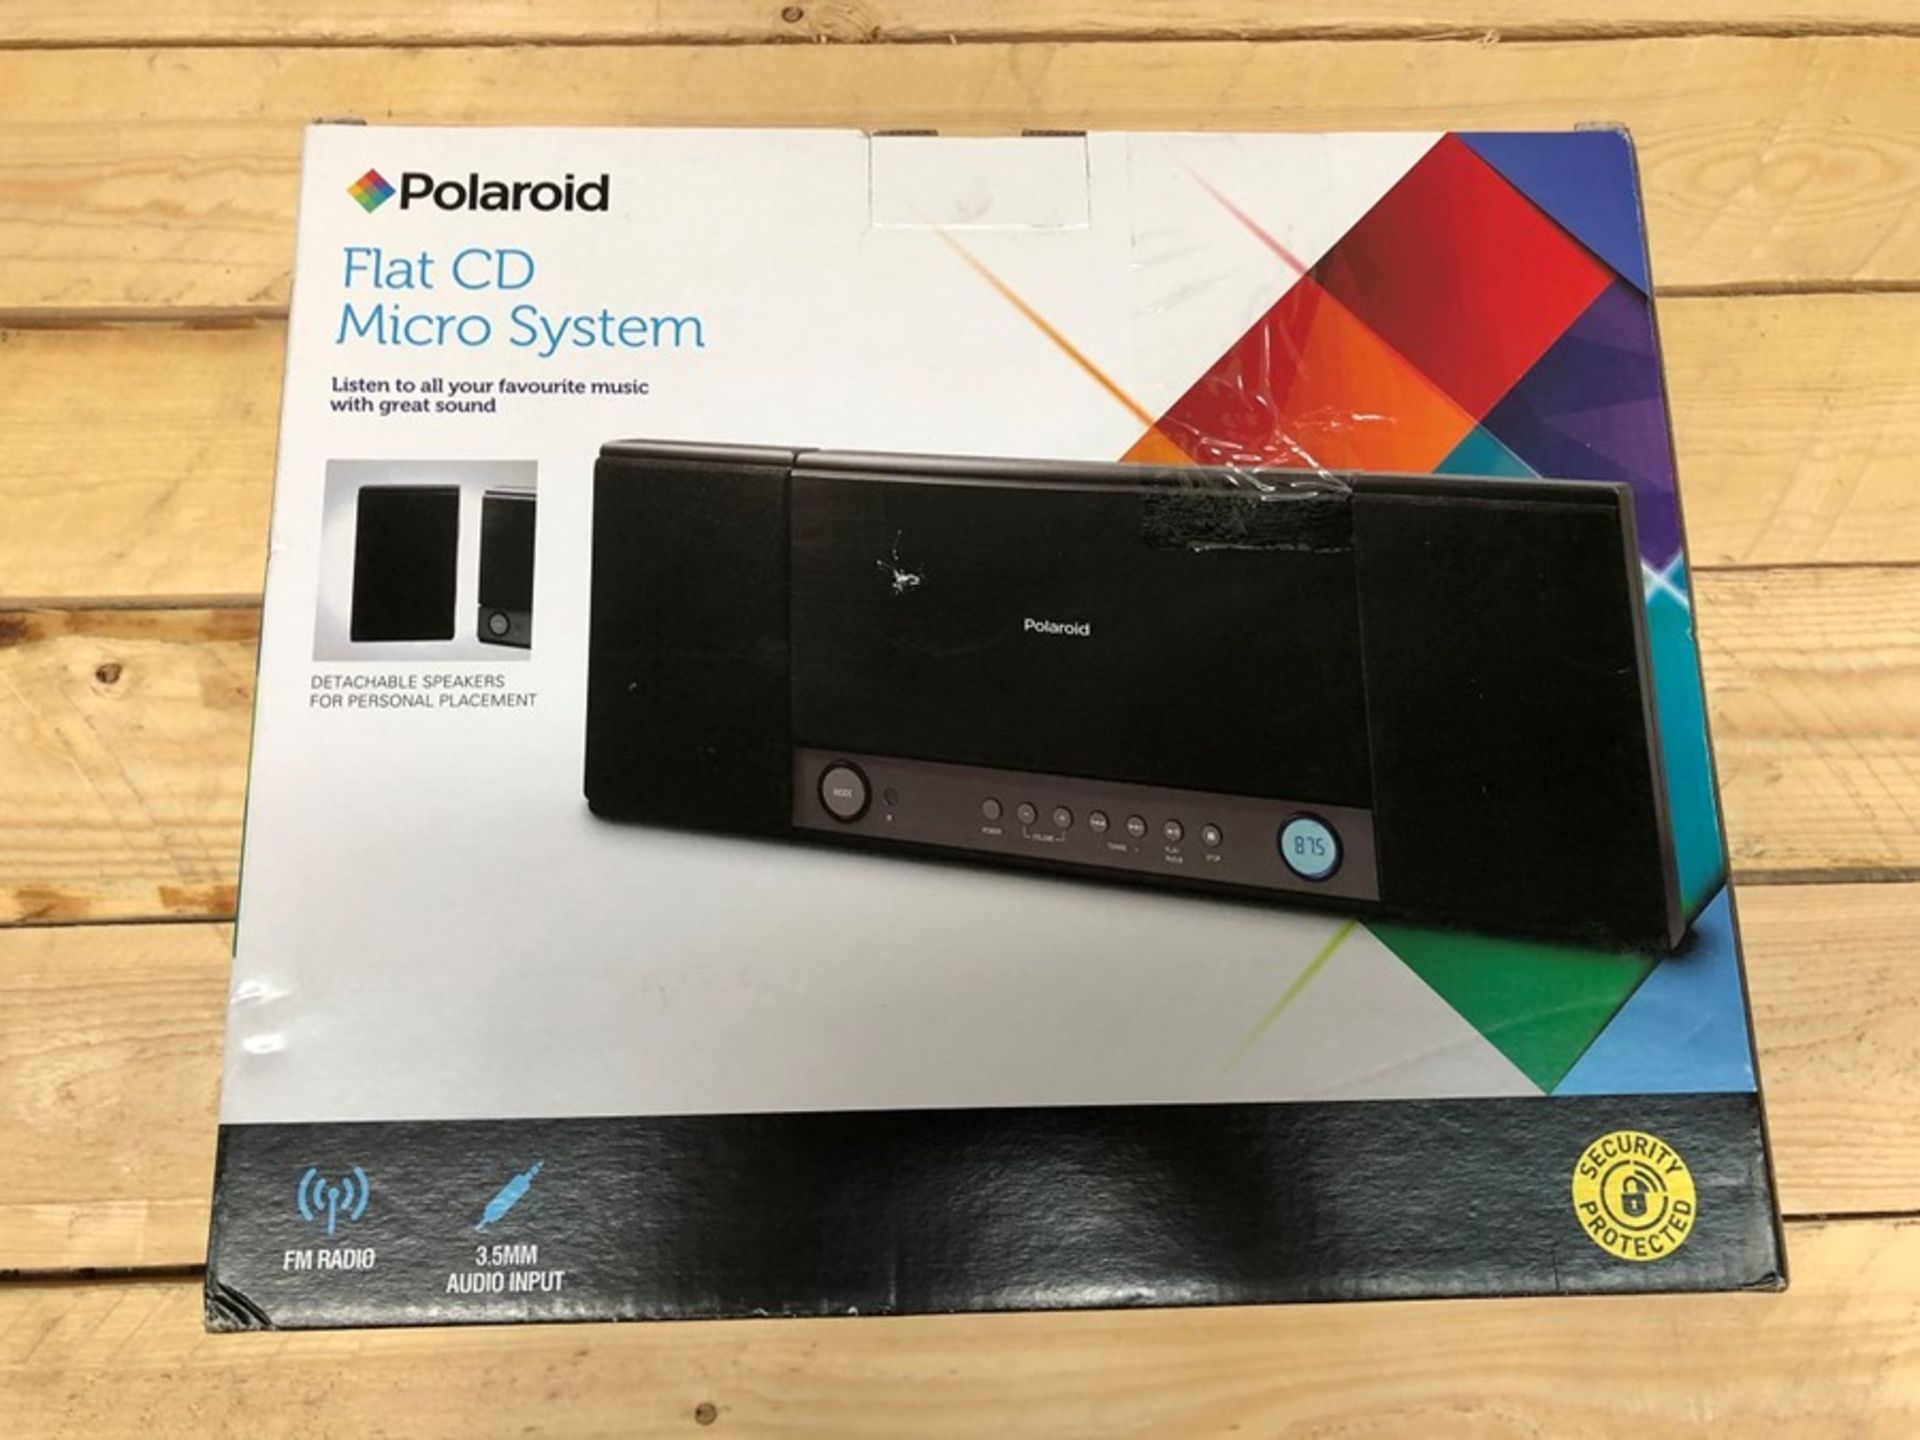 1 BOXED POLAROID FLAT CD MICRO SYSTEM / RRP £35.00 (VIEWING HIGHLY RECOMMENDED)